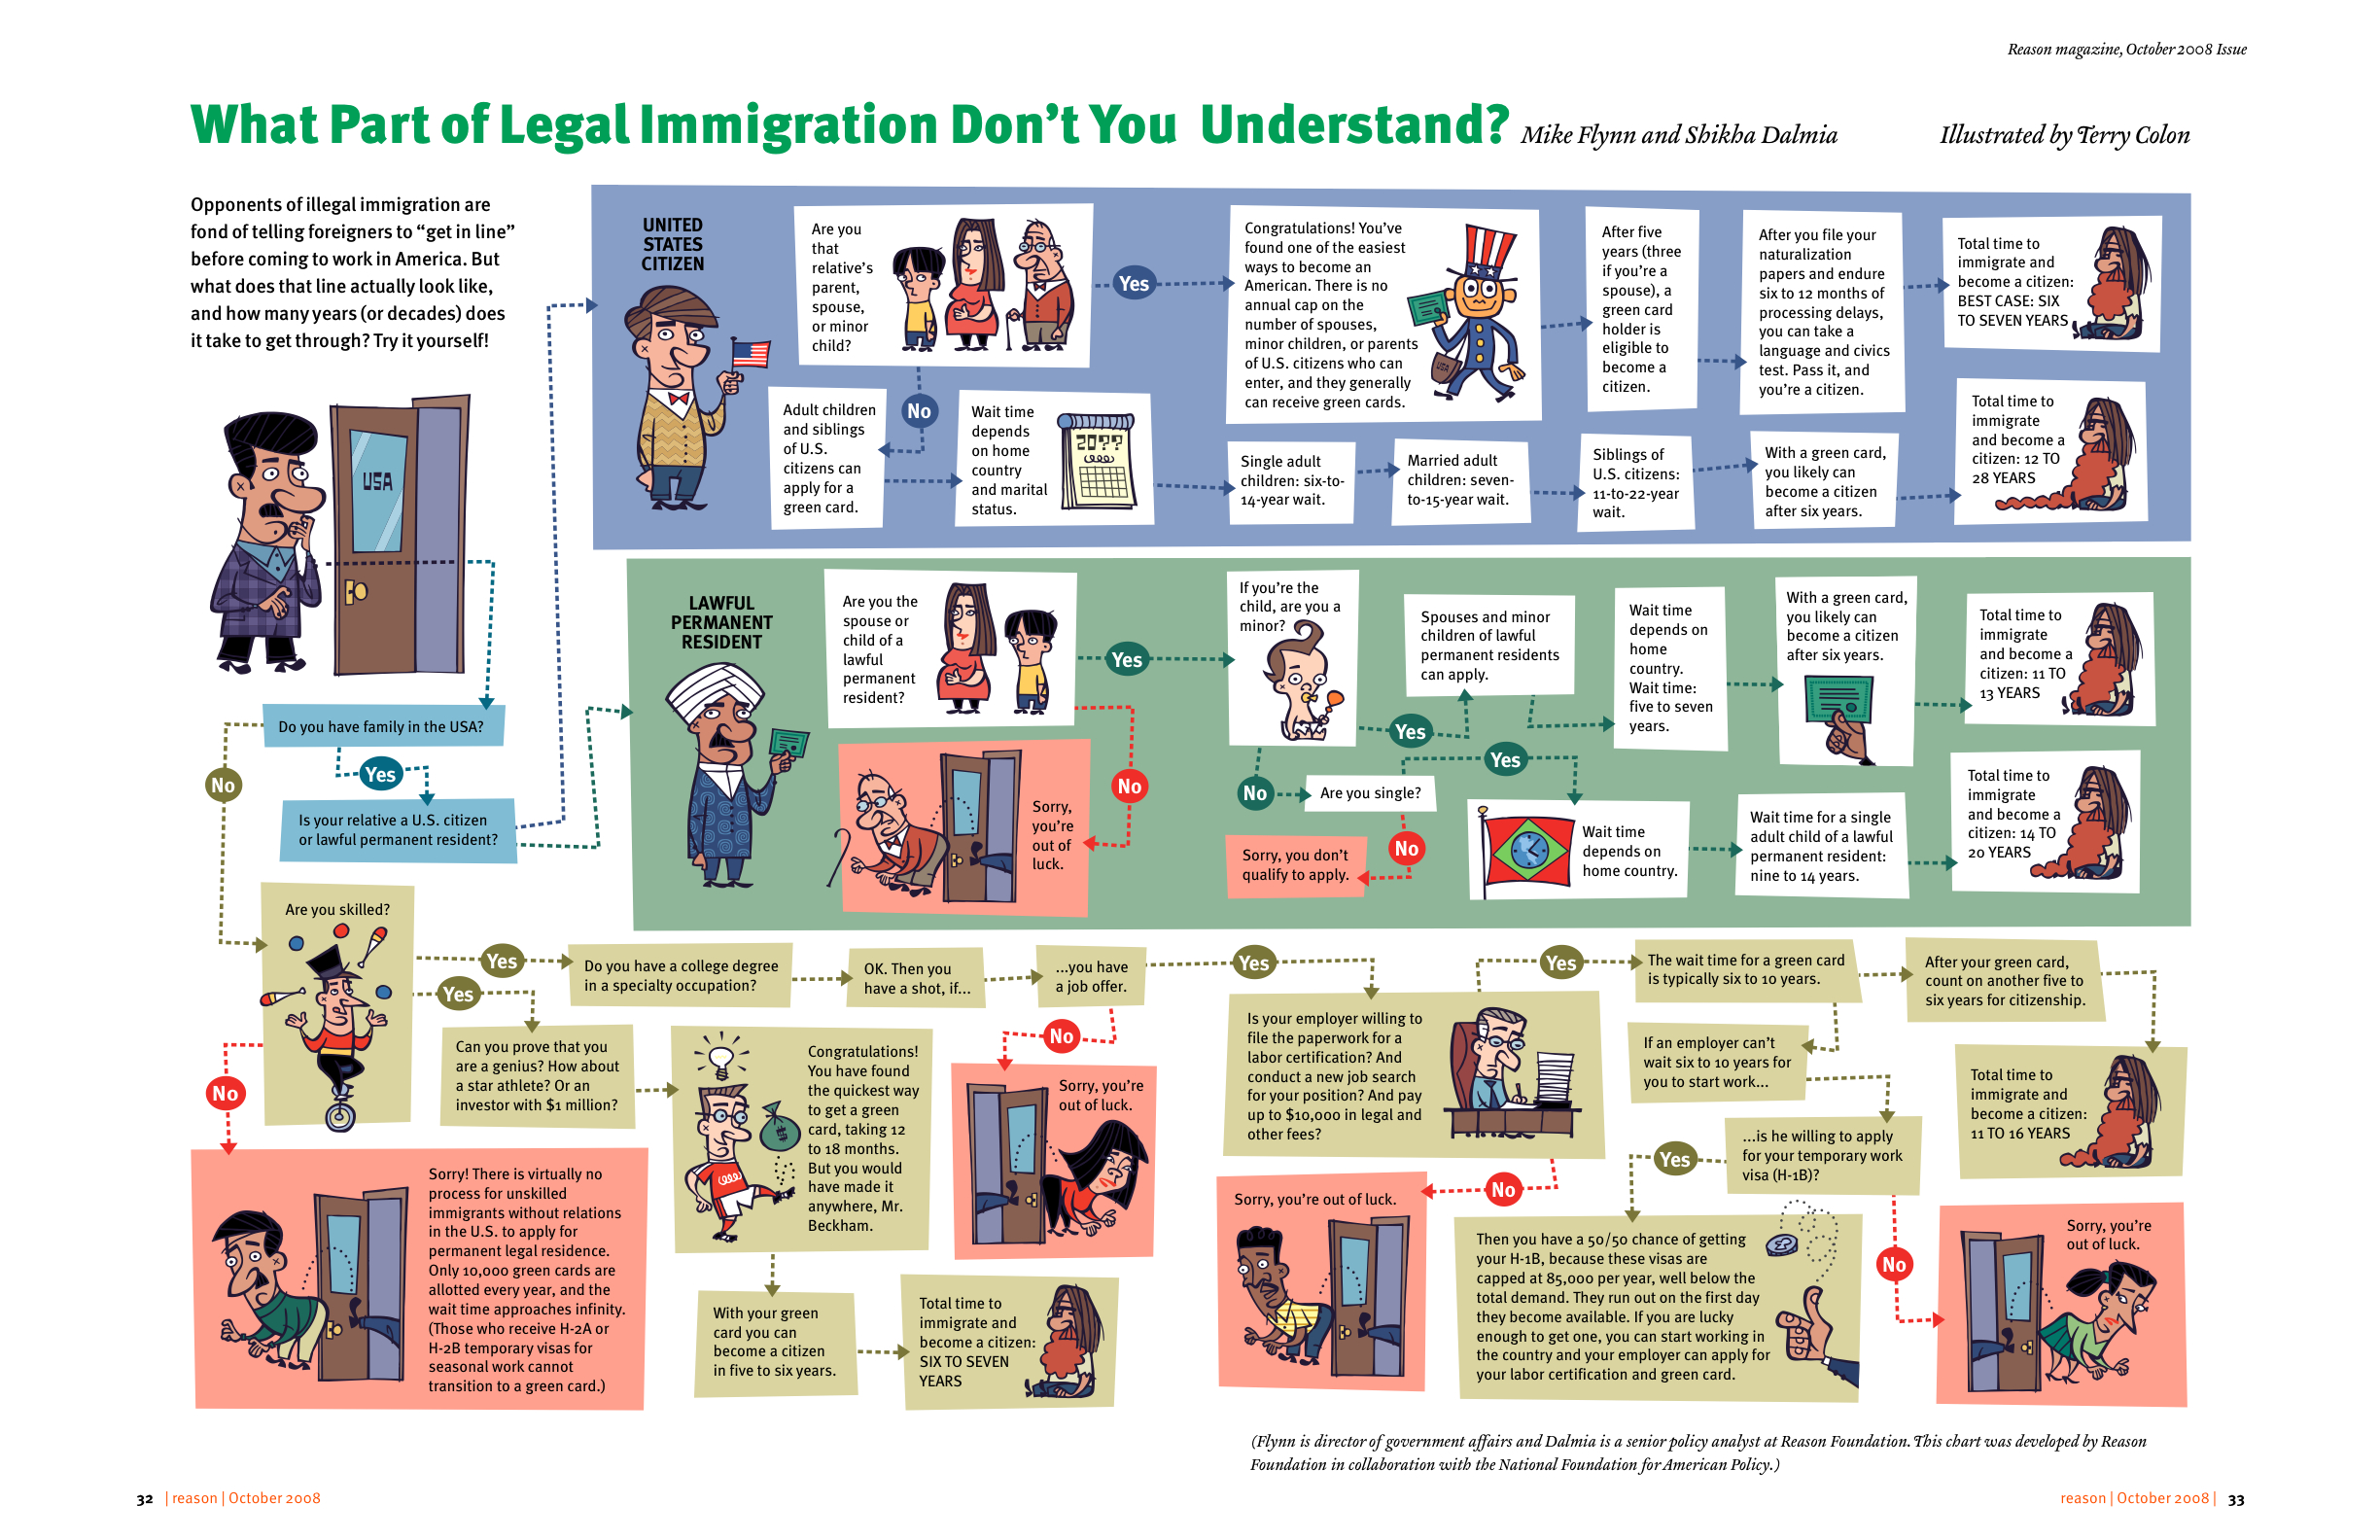 IMAGE(http://www.openlawlab.com/wp-content/uploads/2011/10/IMmigration-Law-Comic-Terry-Colon-Reason.jpg)